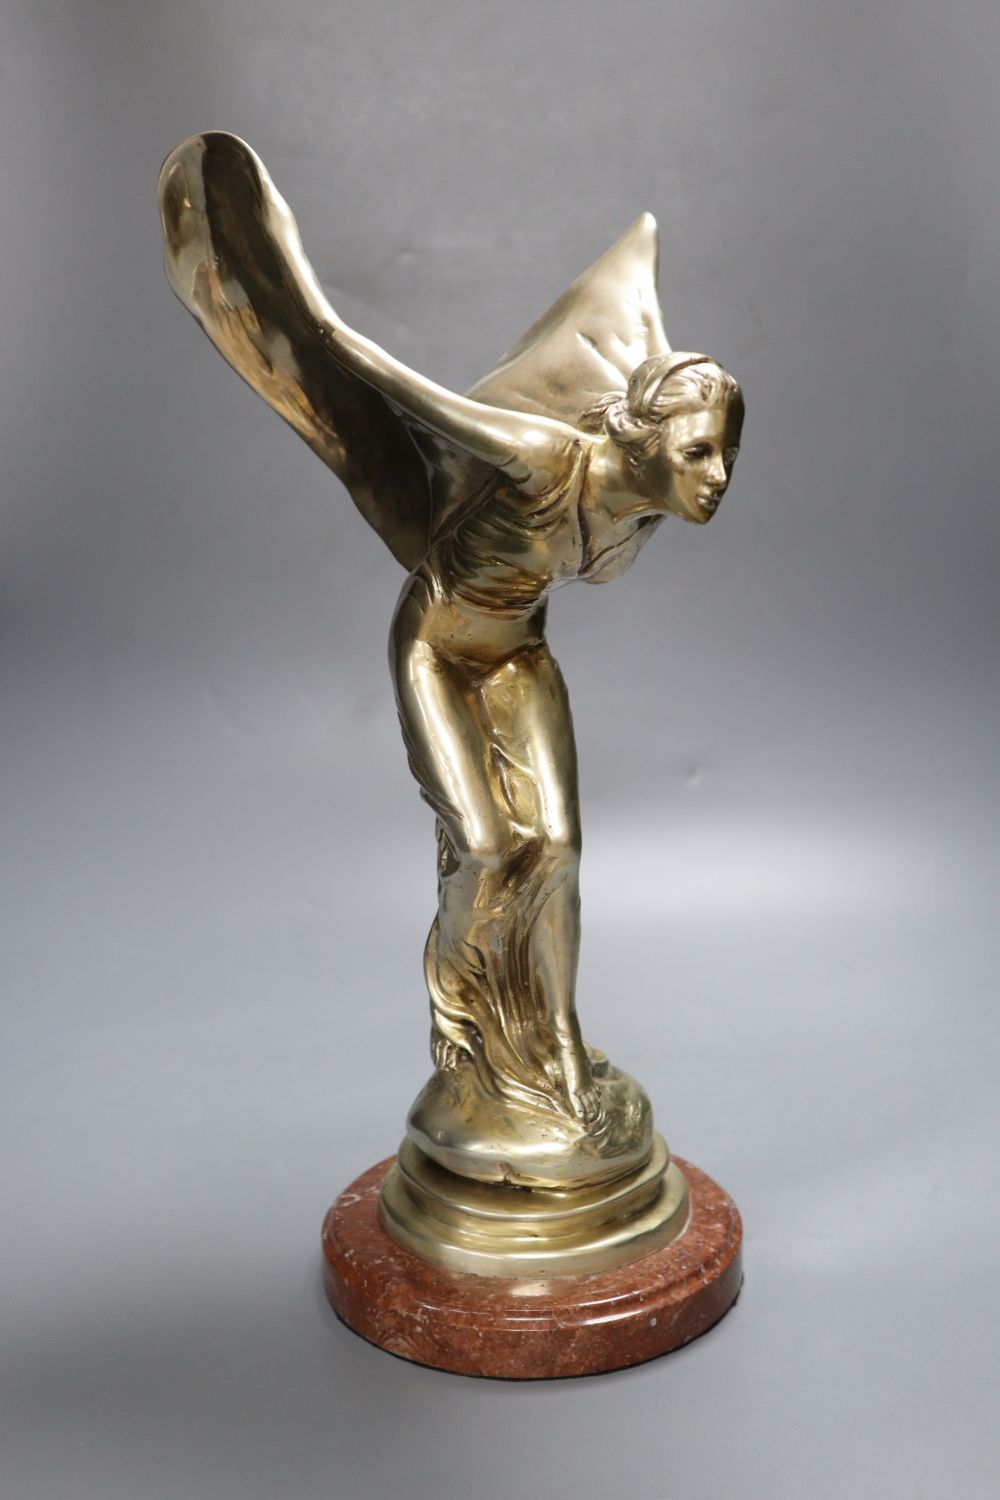 A silver plated figure in the style of Spirit of Ecstasy after Sykes, 39cm